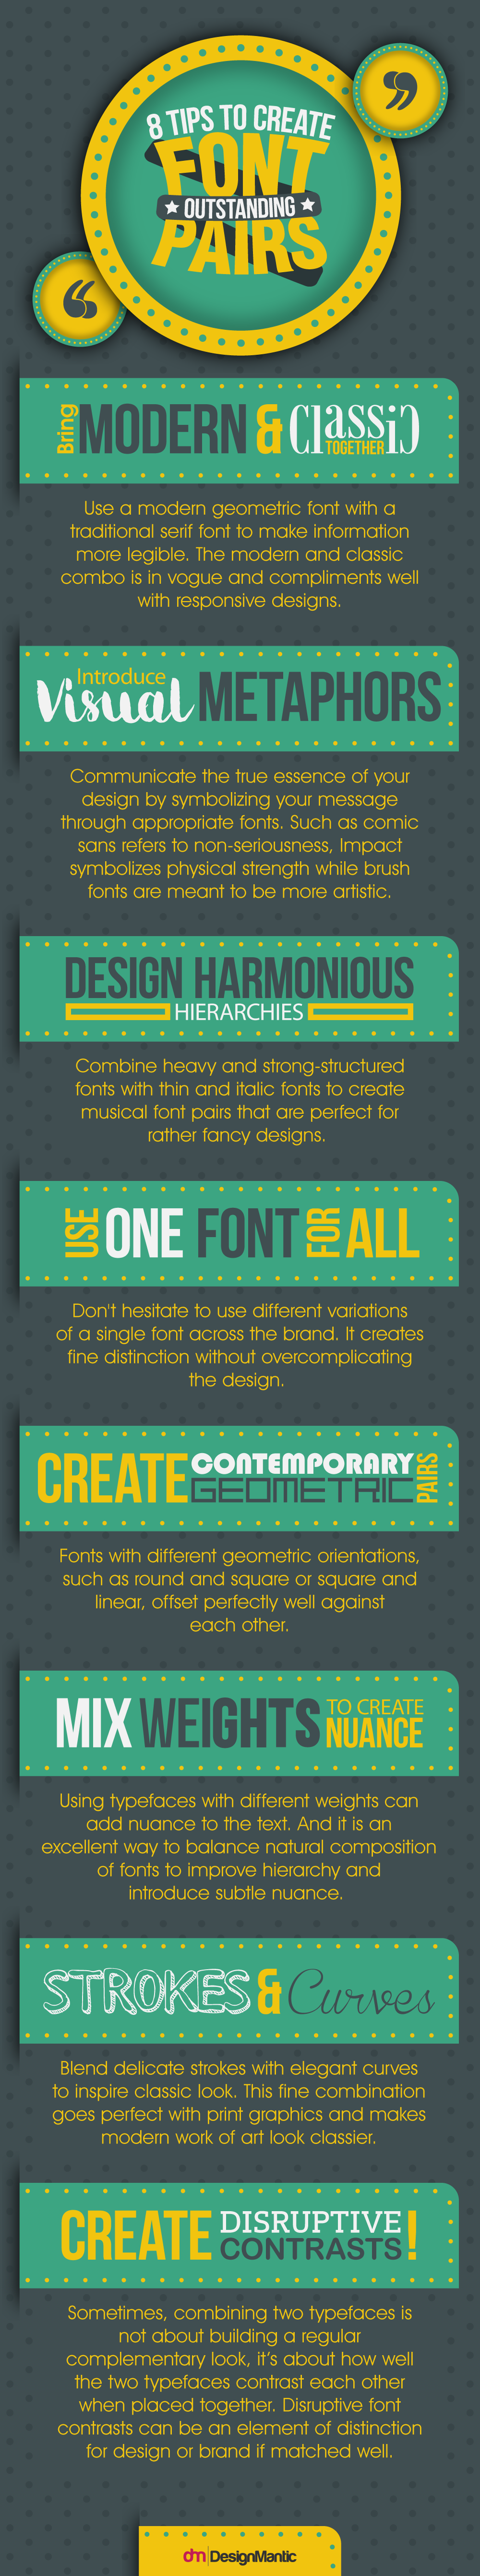 8 Ways To Pair Fonts For Better Designs [Infographic]